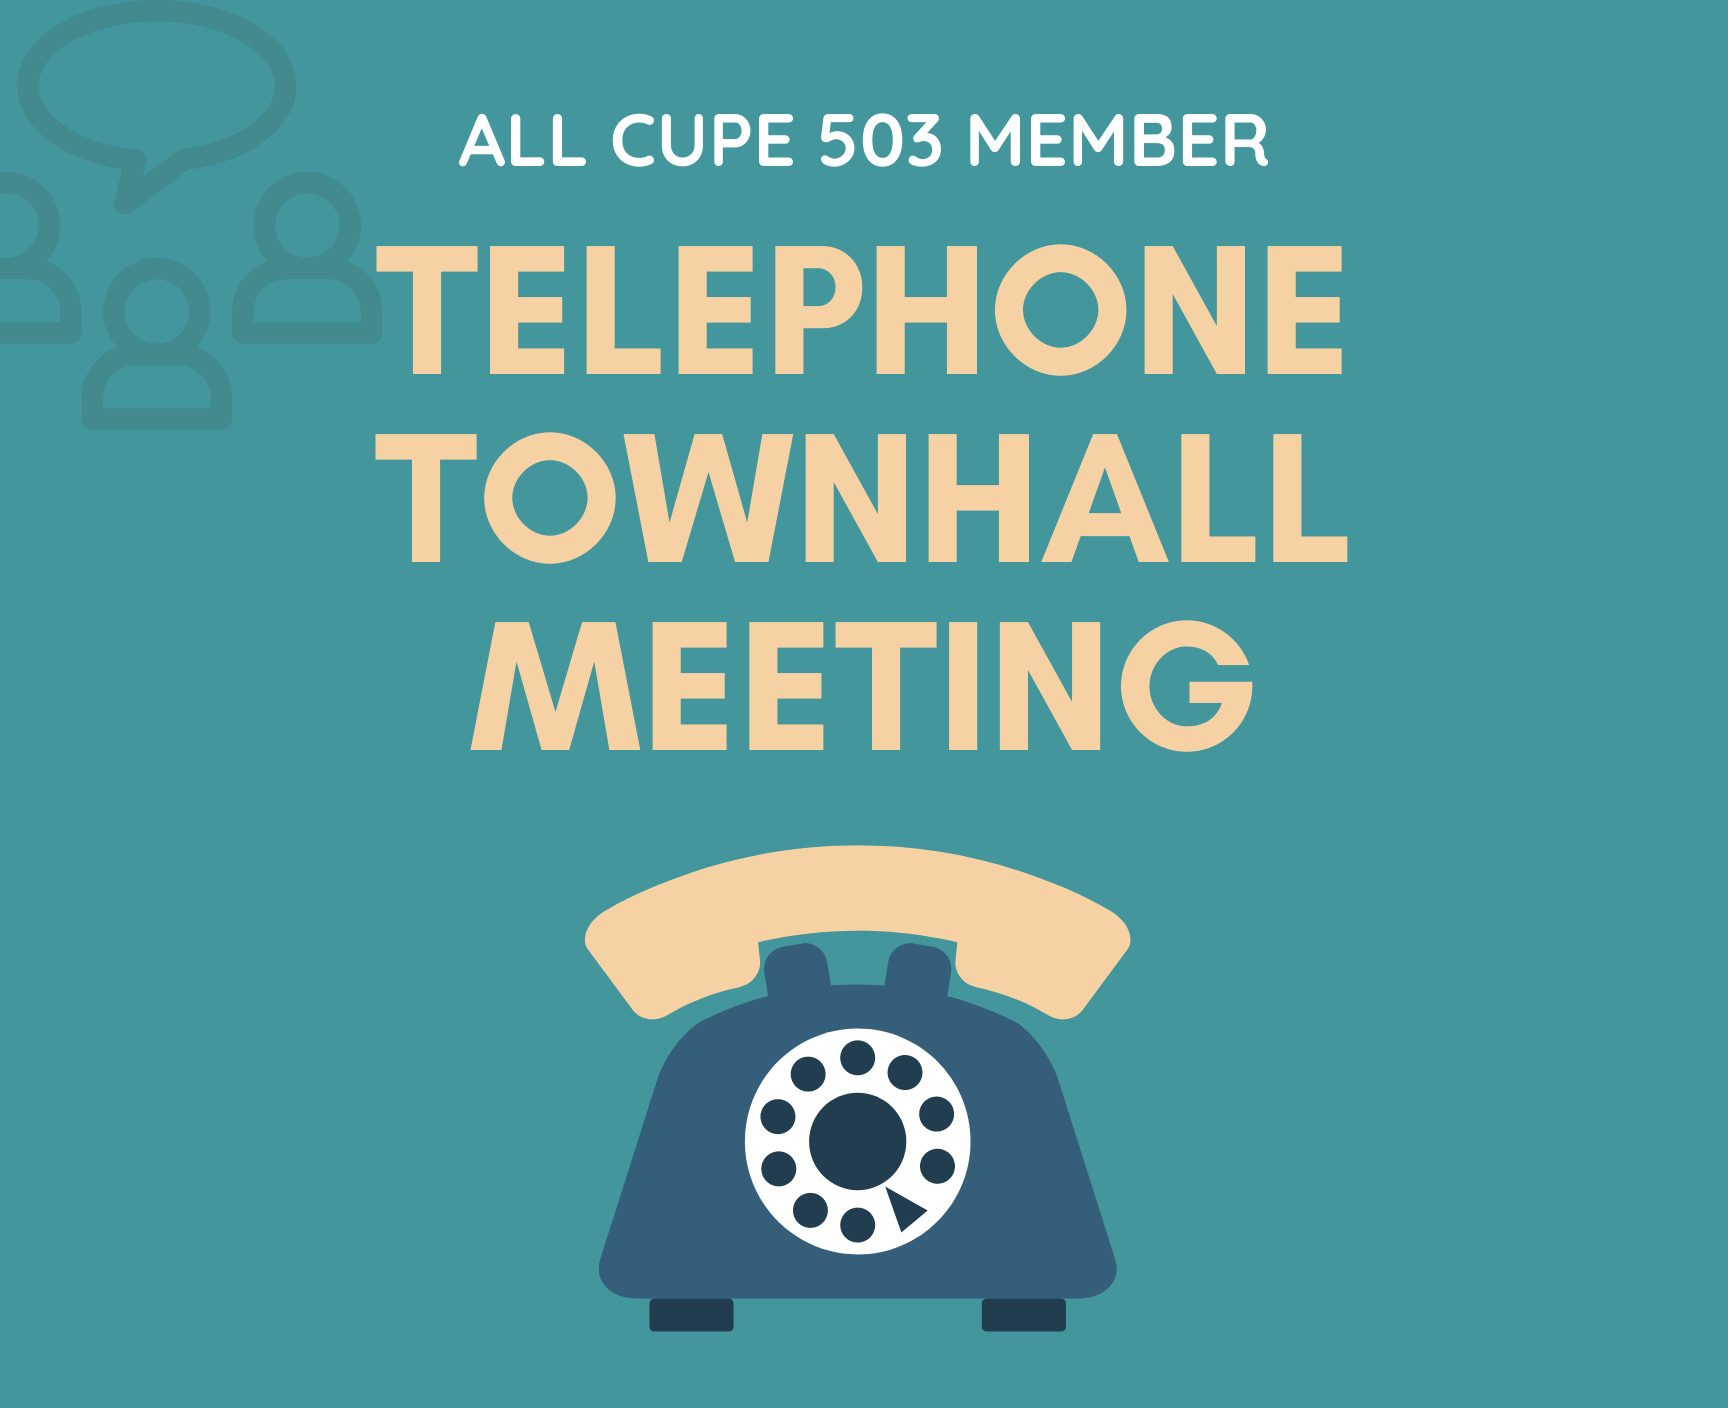 CUPE 503 Member Telephone Townhall